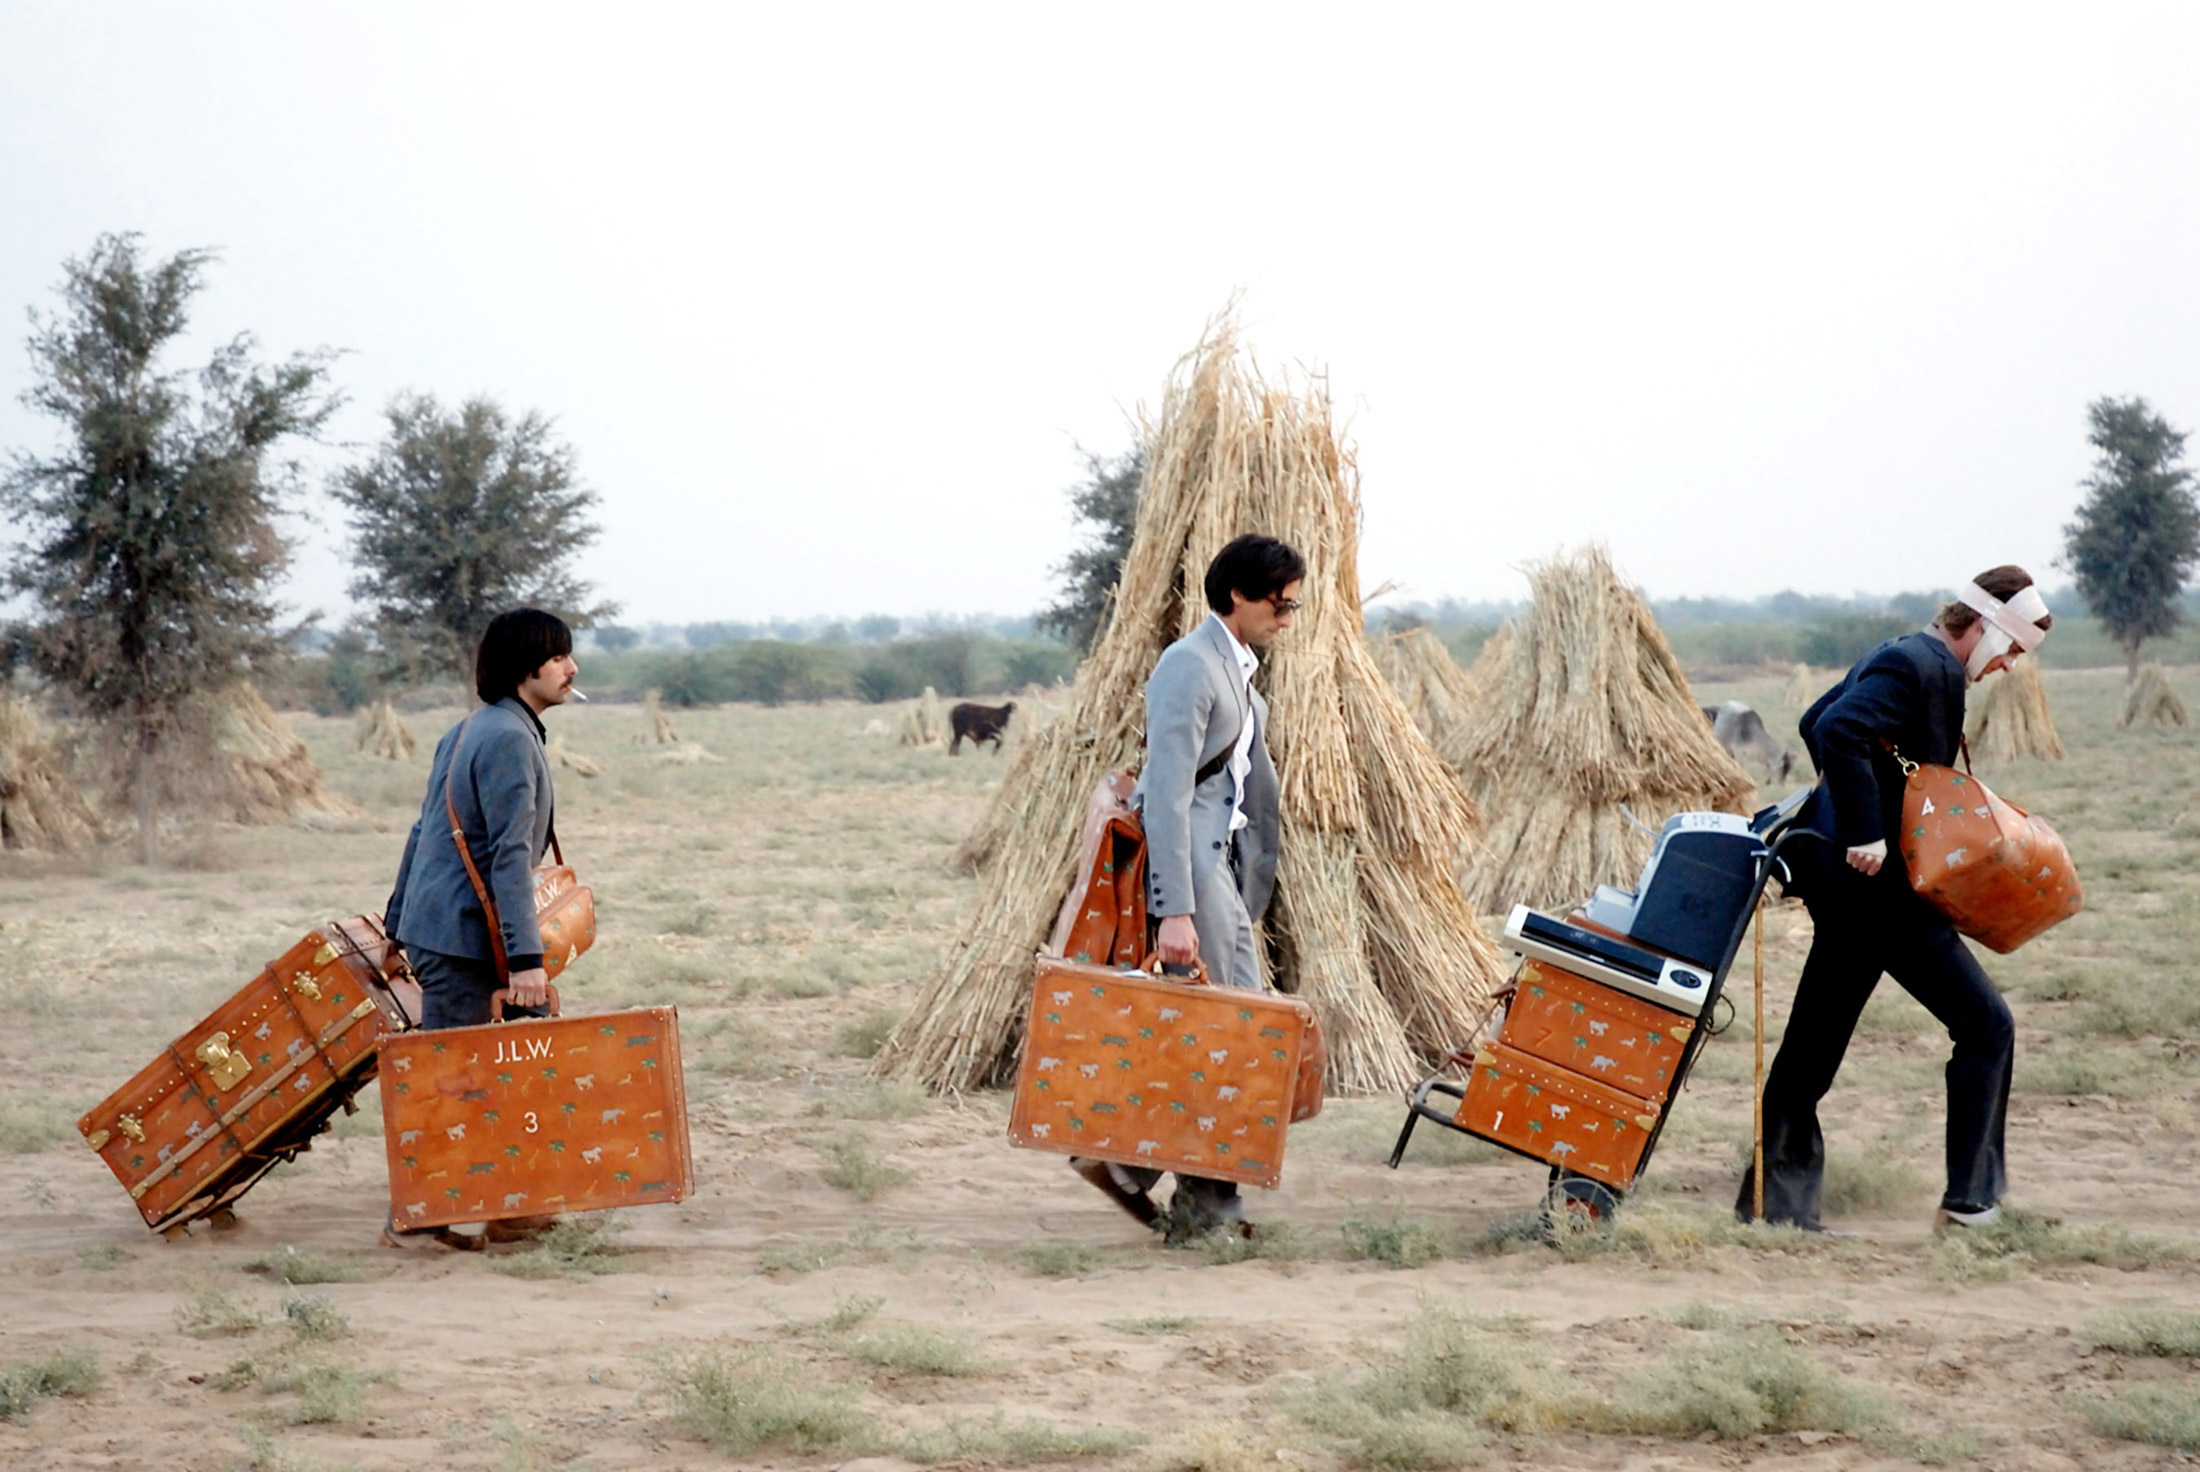 Brothers Peter, Jack, and Francis Whitman walk across a field with their monogrammed luggage in Wes Anderson's film The Darjeeling Limited (2007). 